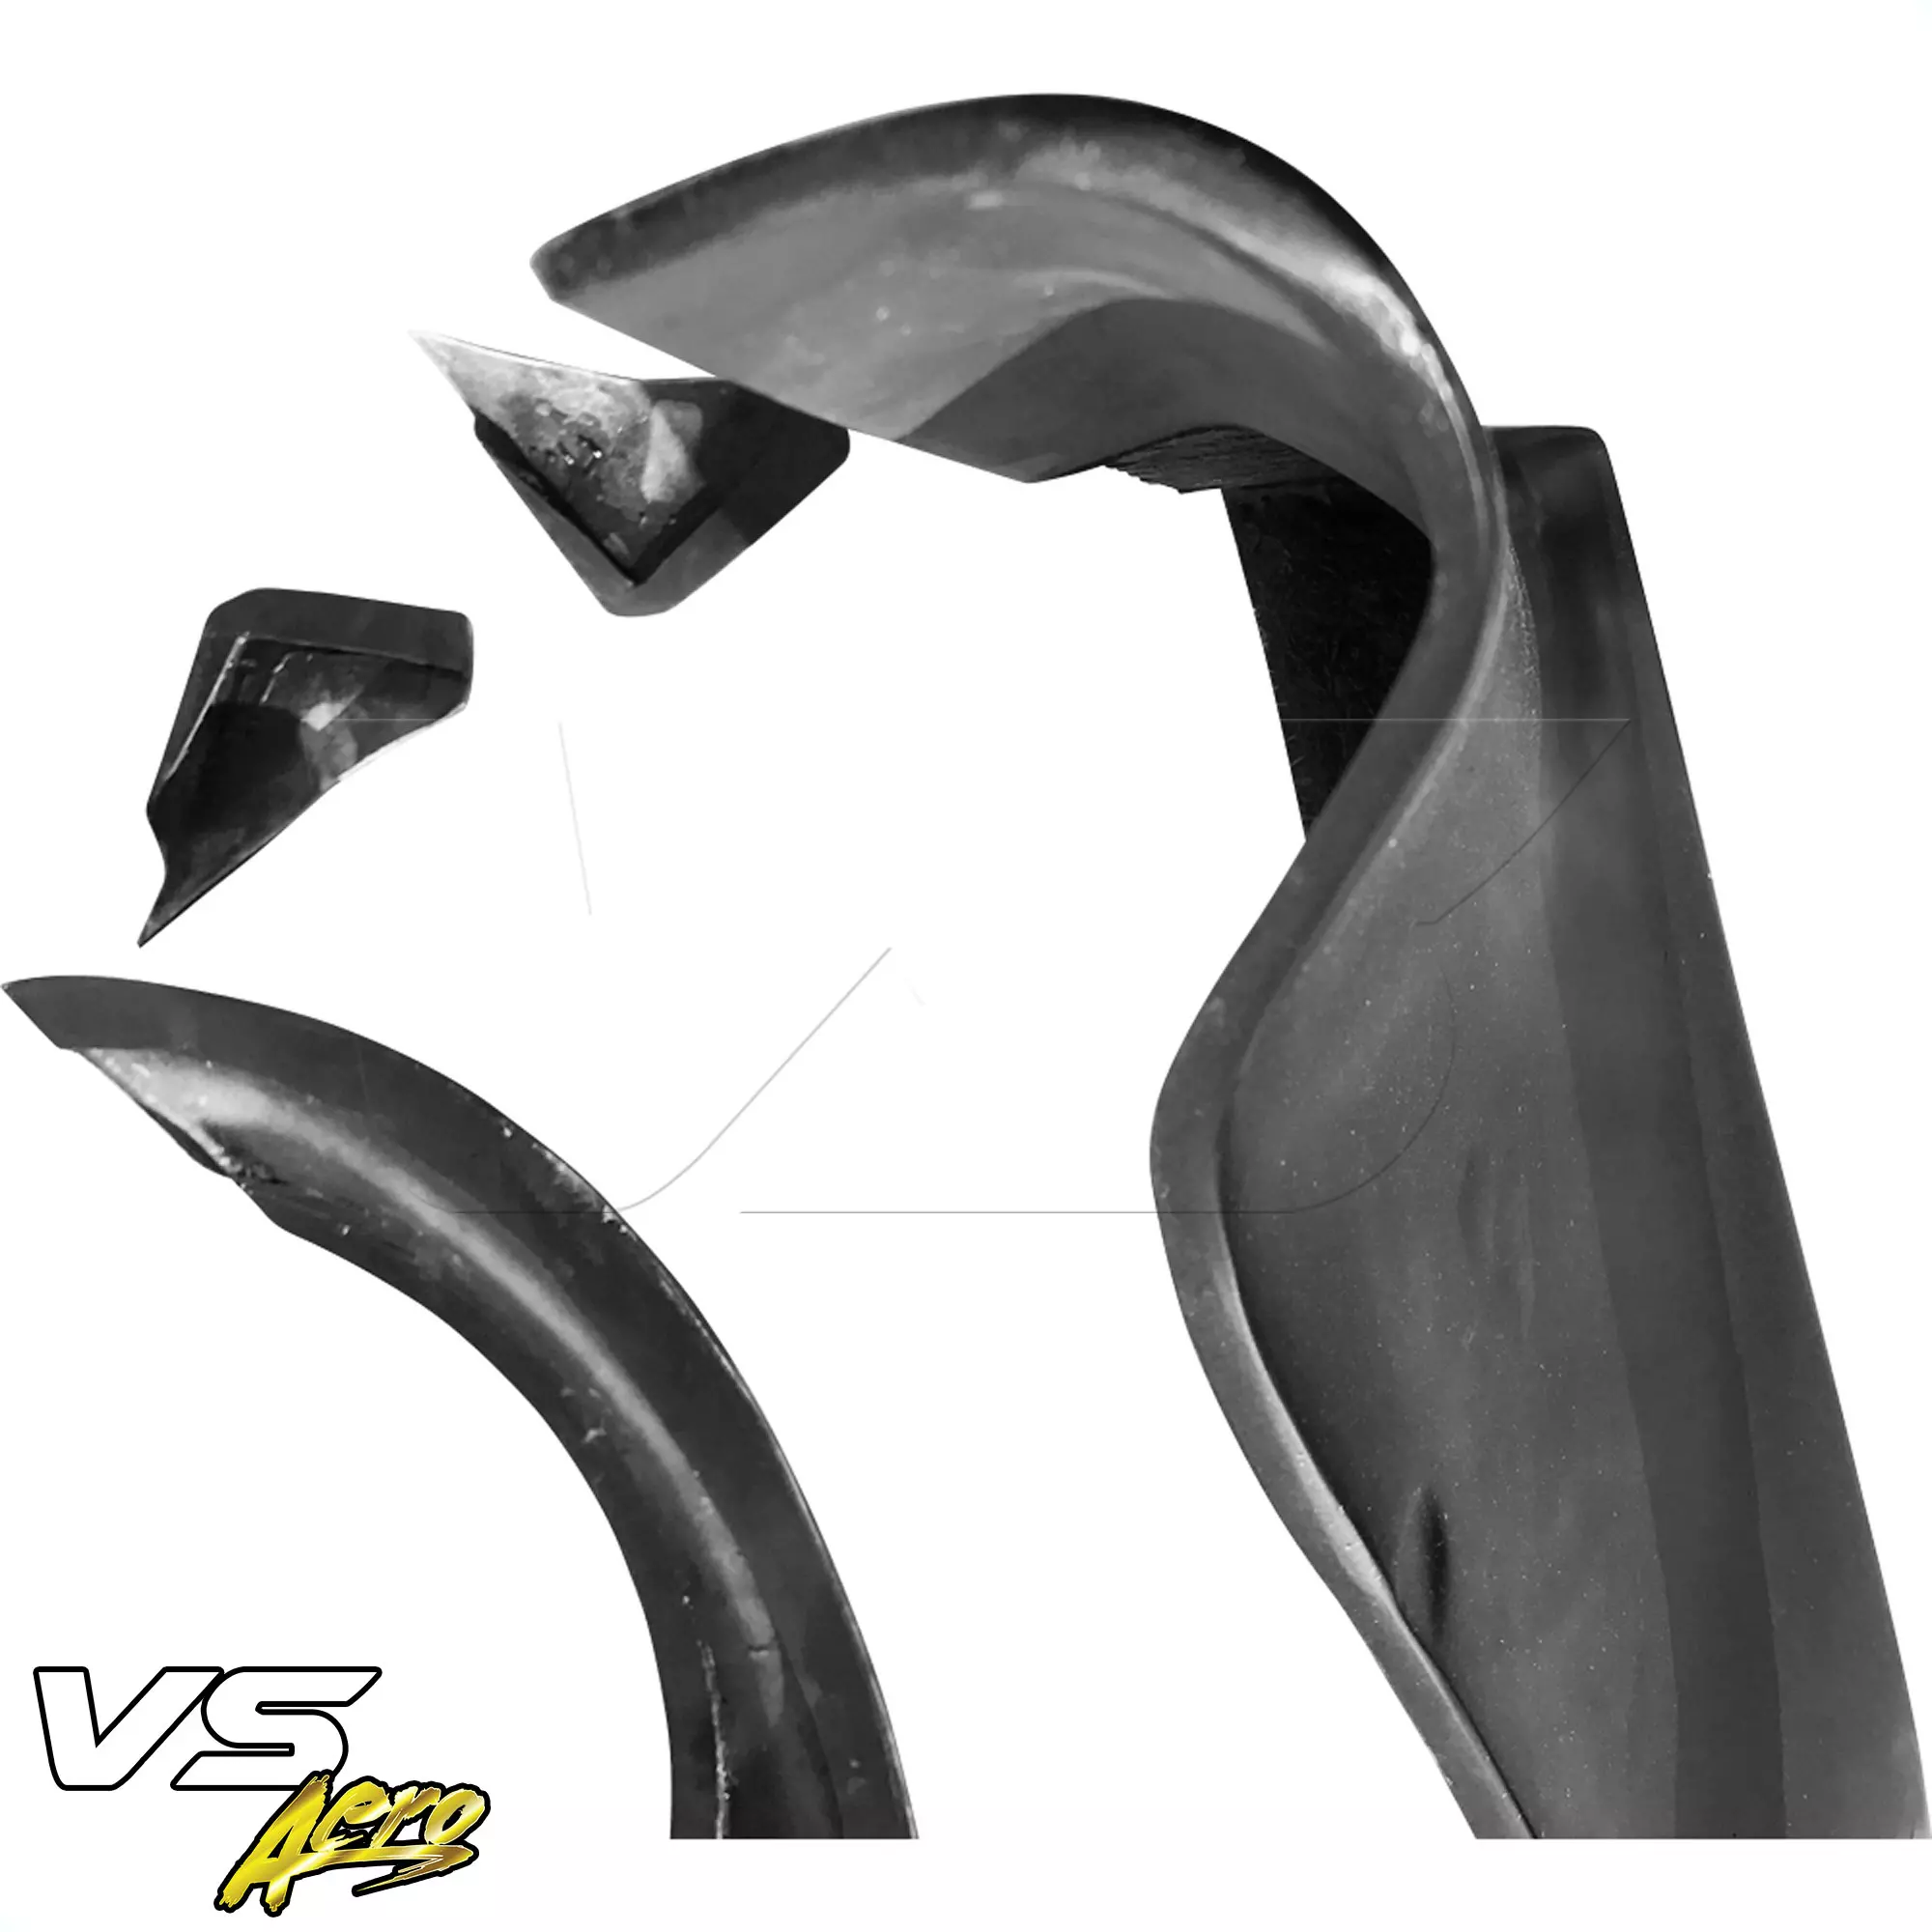 VSaero FRP LBPE Wide Body Fender Flares (rear) 4pc > Infiniti G37 Coupe 2008-2015 > 2dr Coupe - Image 18